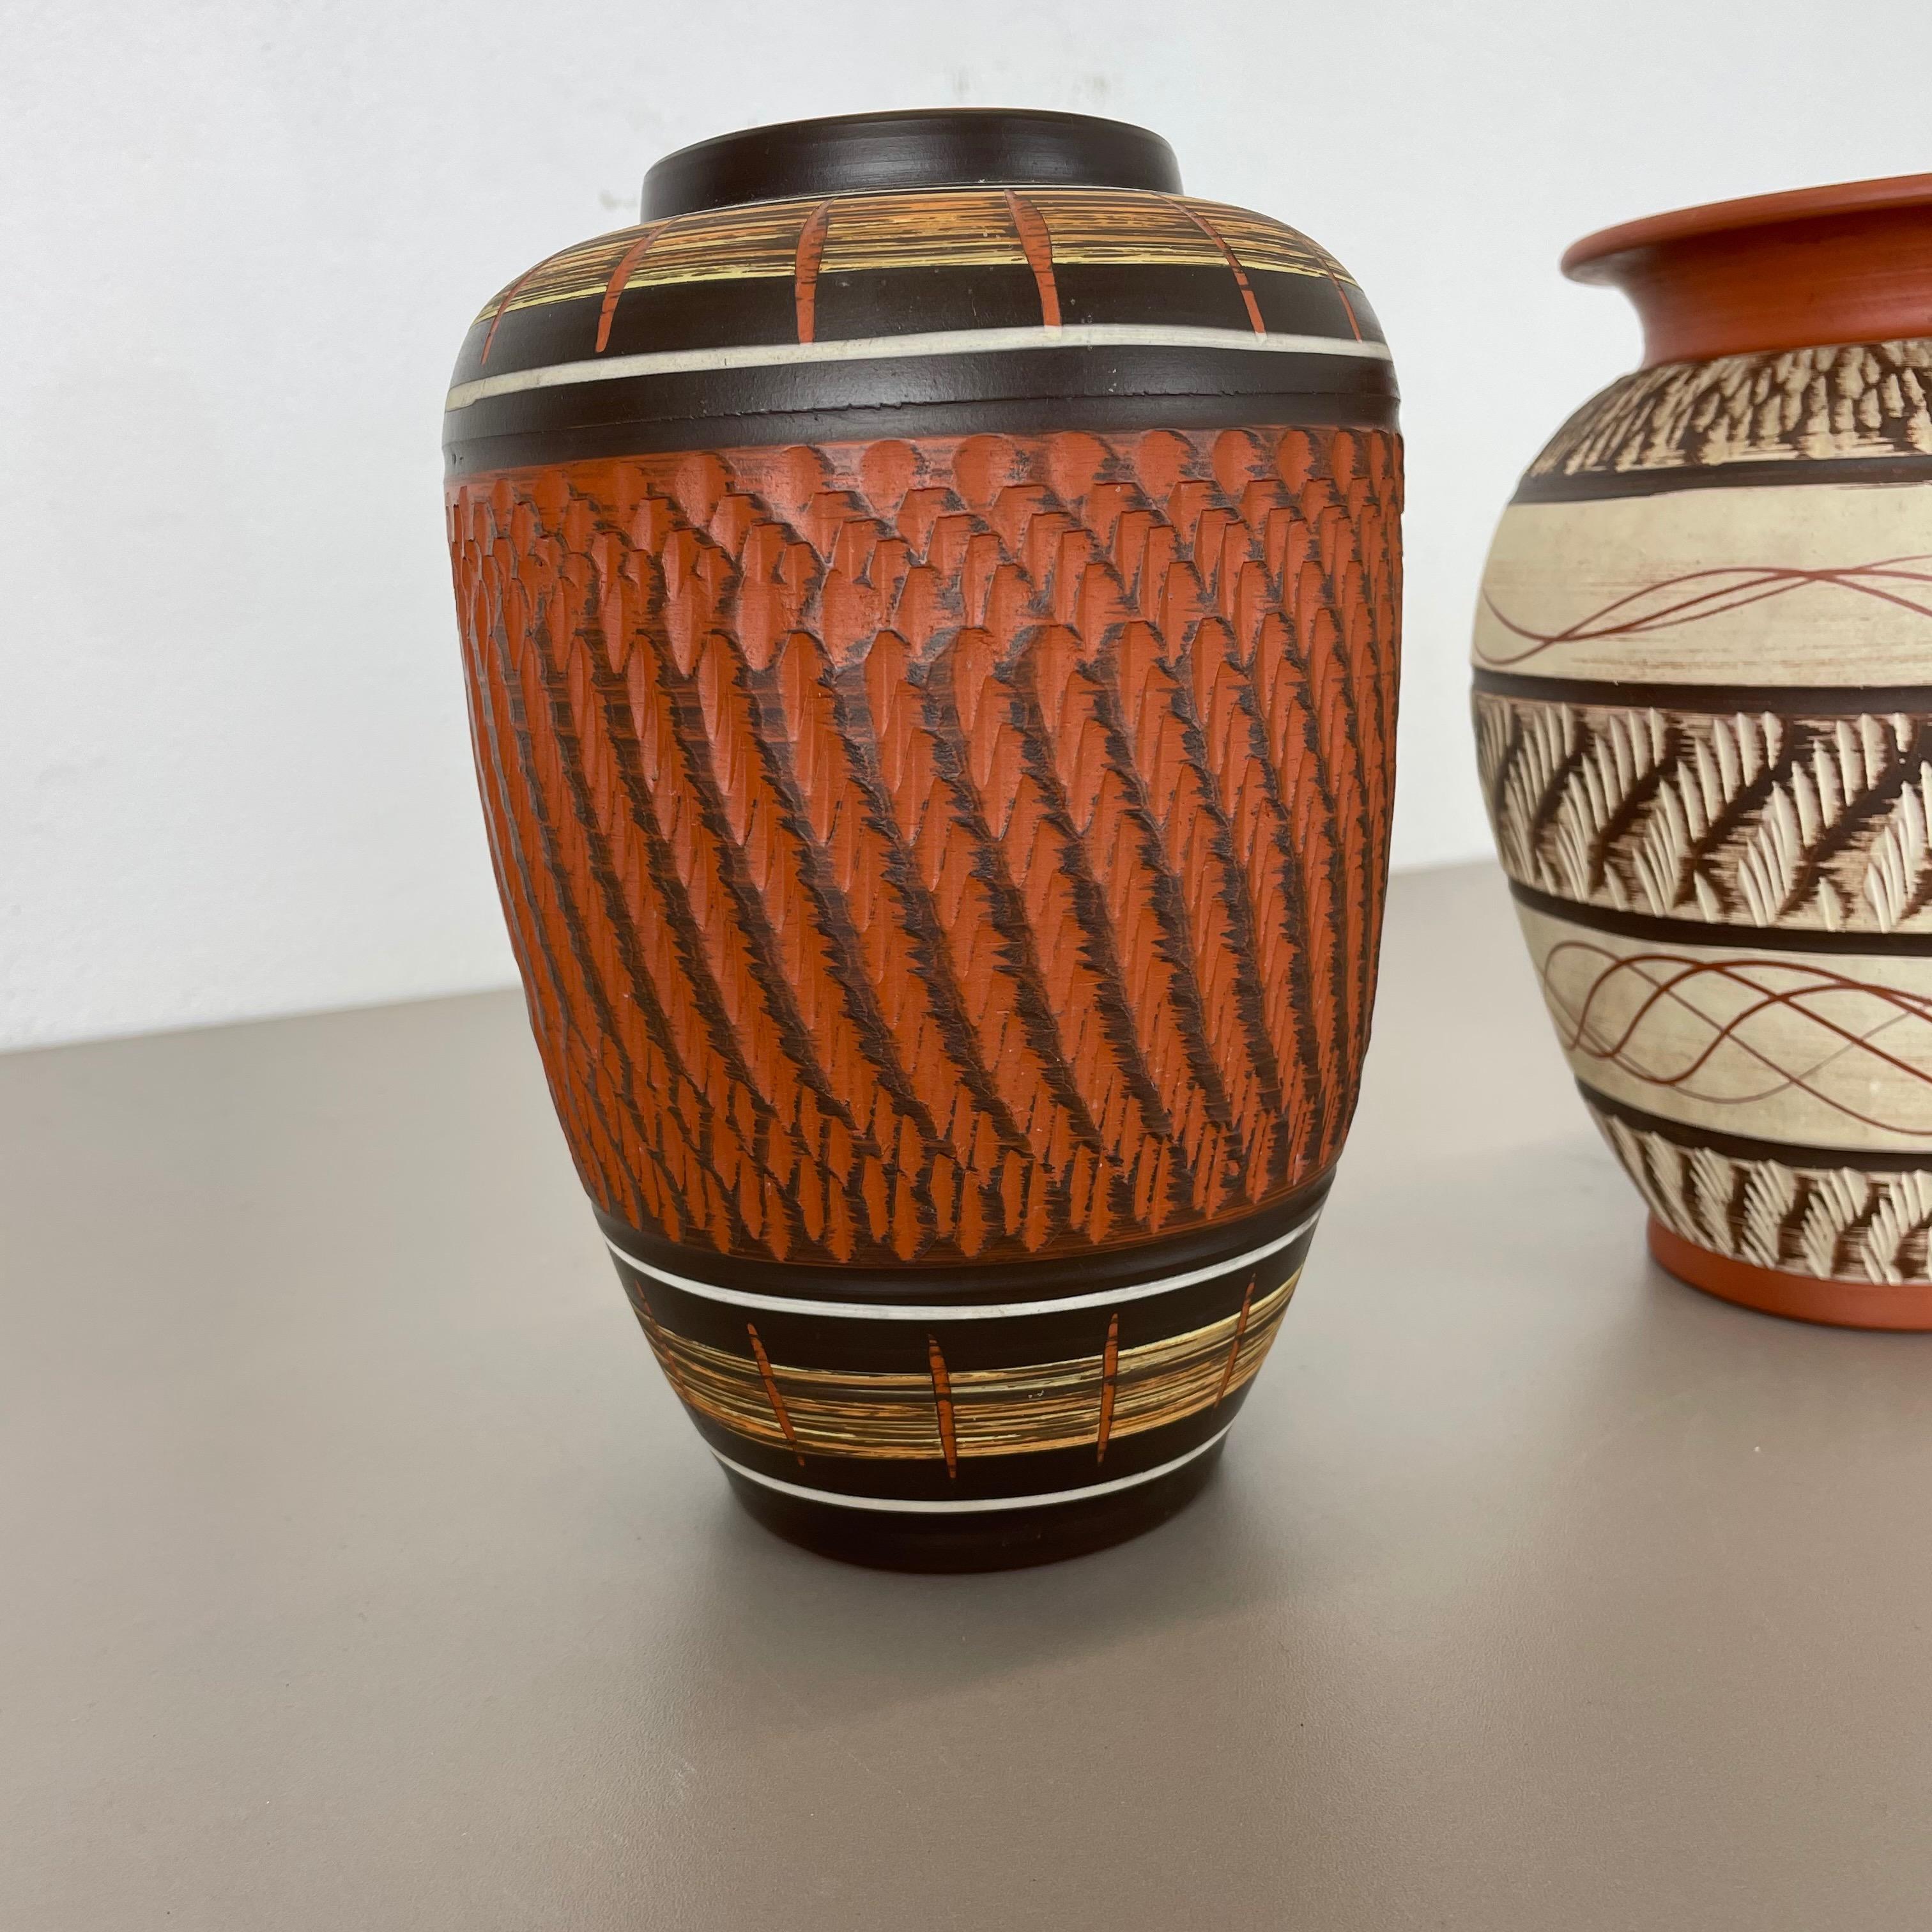 Set of 3 Abstract Ceramic Pottery Vases by EIWA / AKRU Ceramics, Germany, 1950s For Sale 3